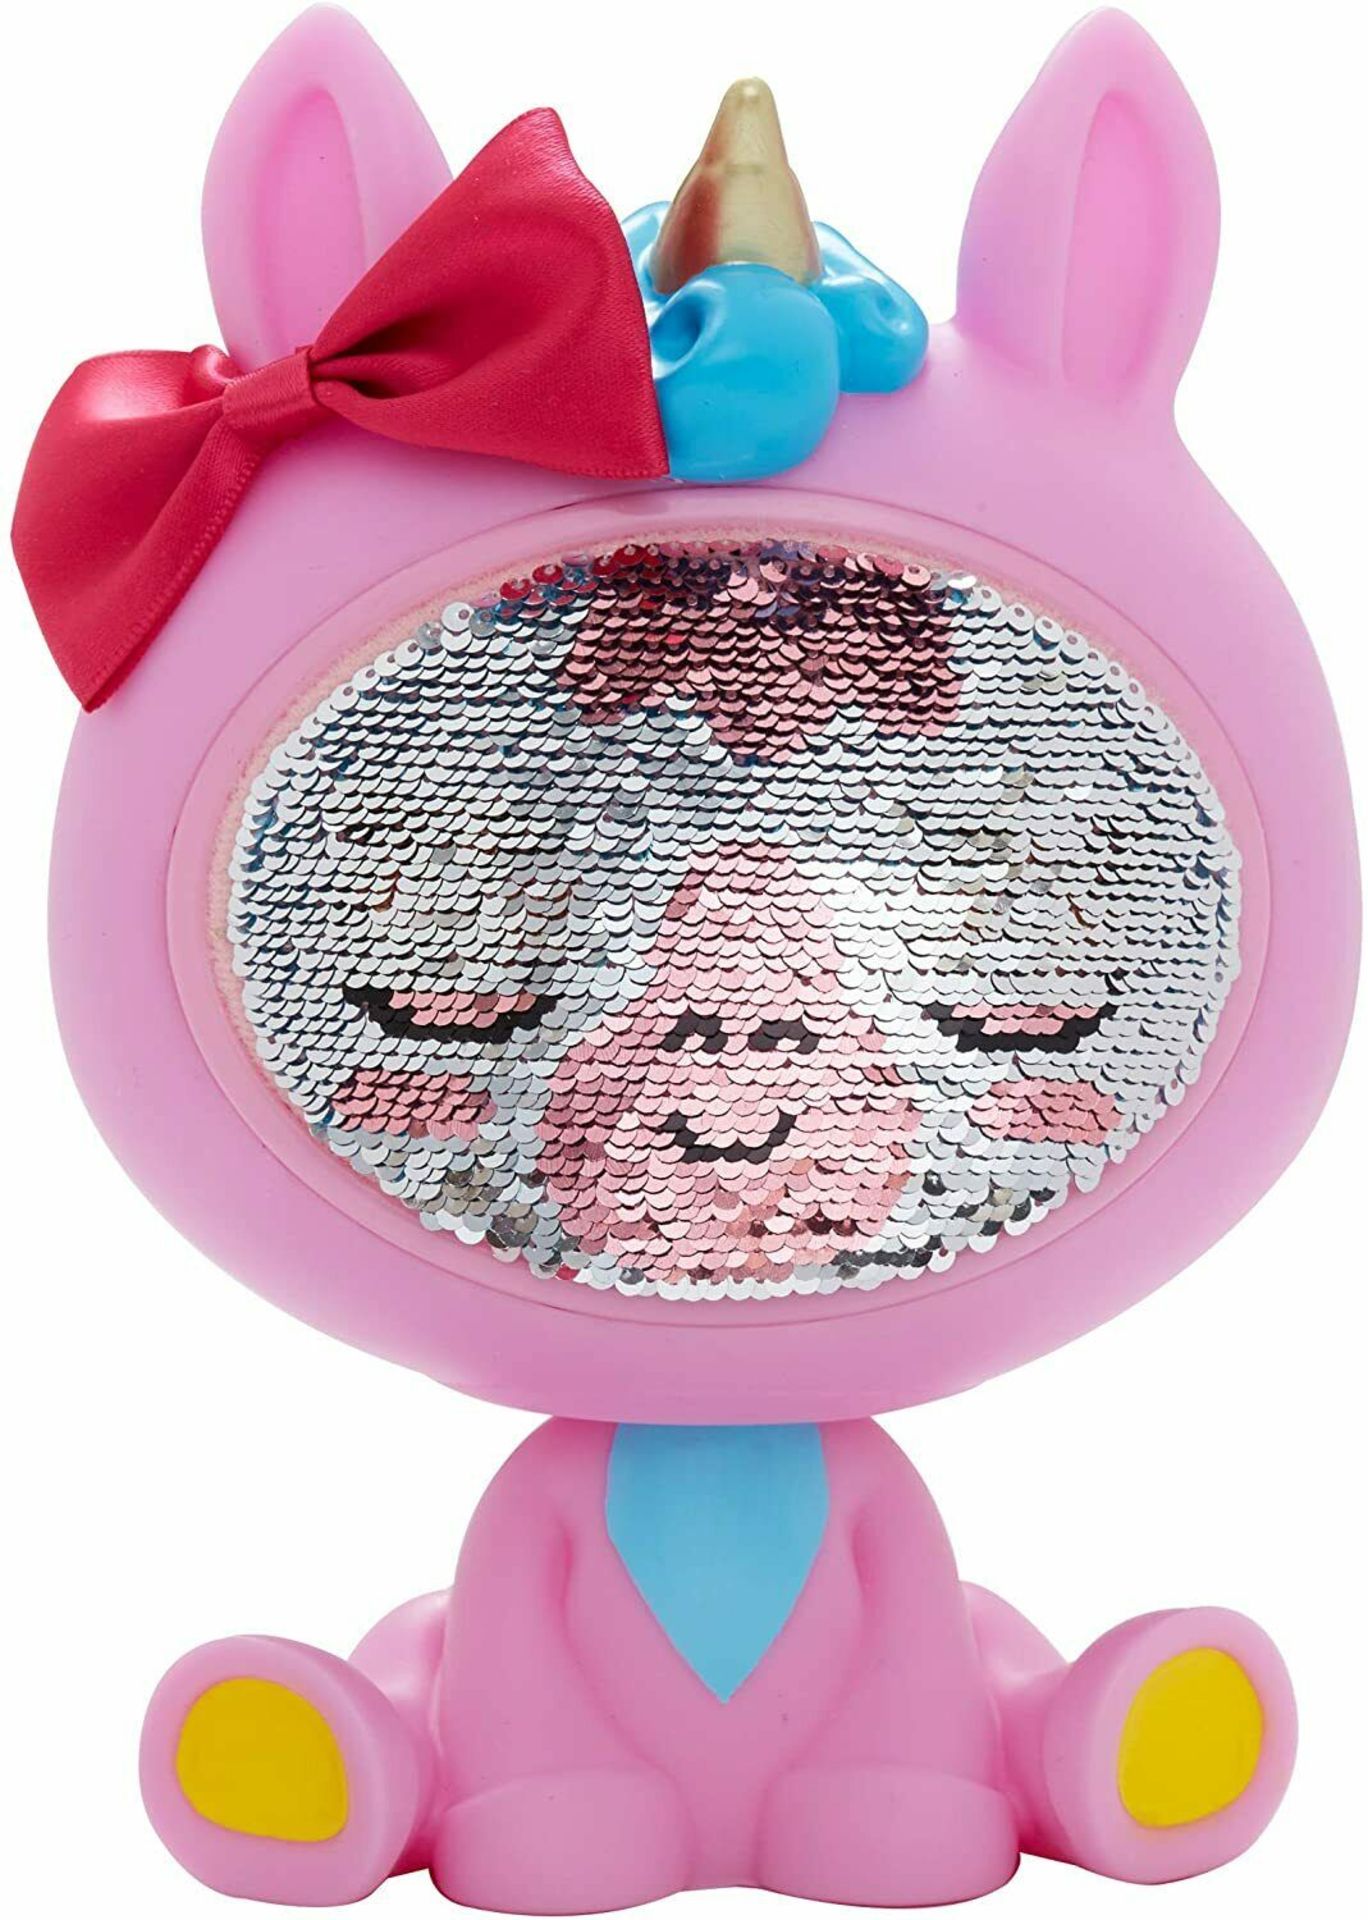 672 x The Zequins Emotions That Sparkle Kids Toys | Total RRP £6,715 - Image 4 of 8